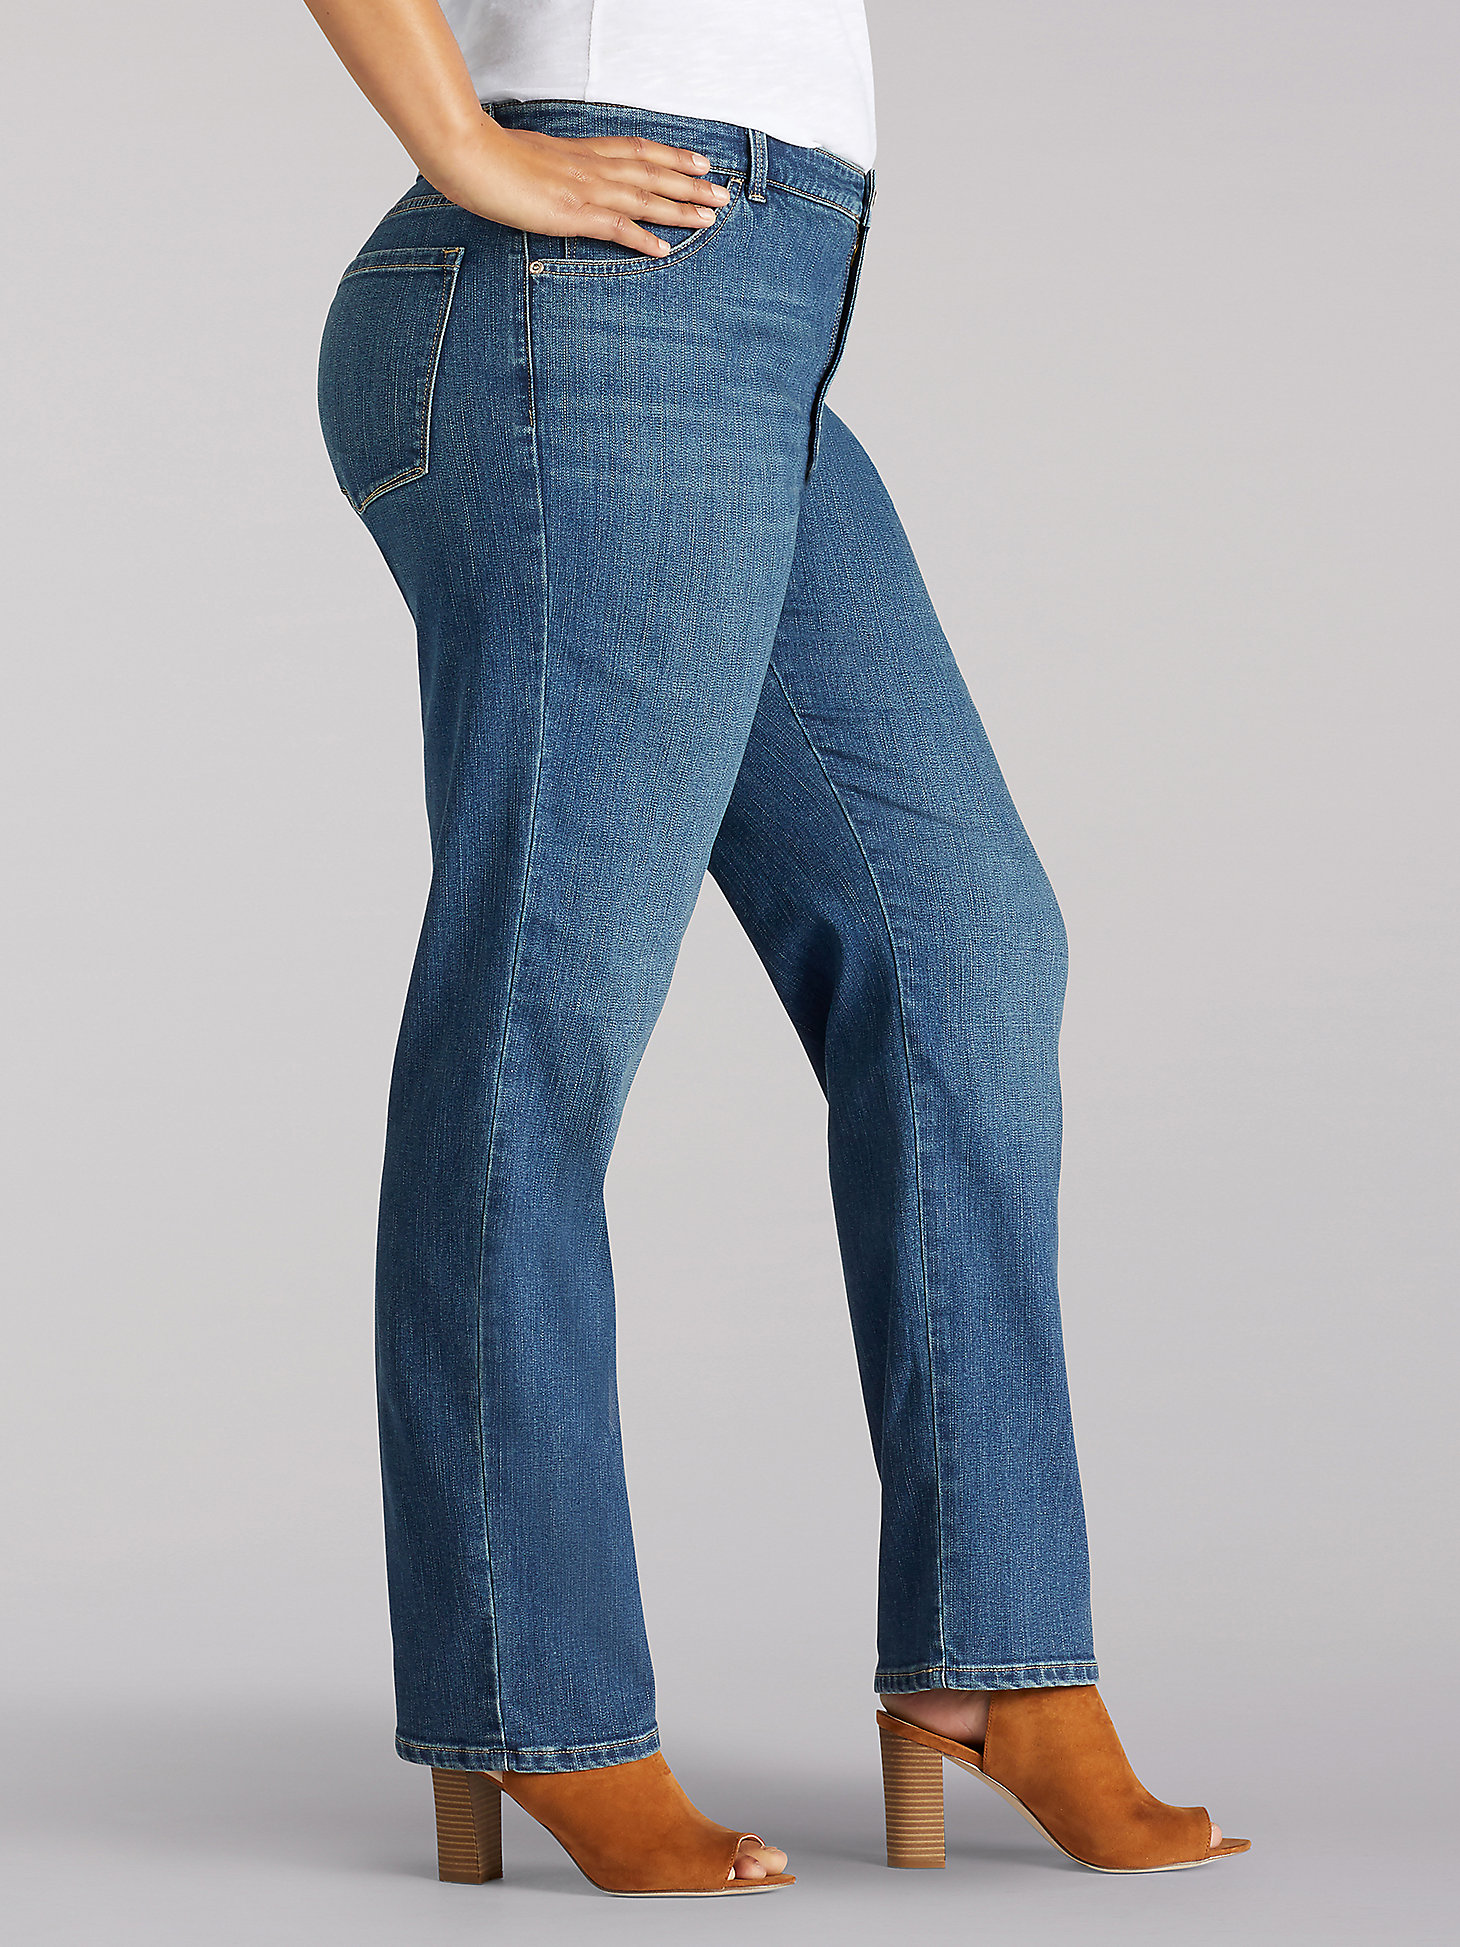 Women’s Instantly Slims Relaxed Fit Straight Leg Jean Classic Fit (Plus) in Seattle alternative view 2